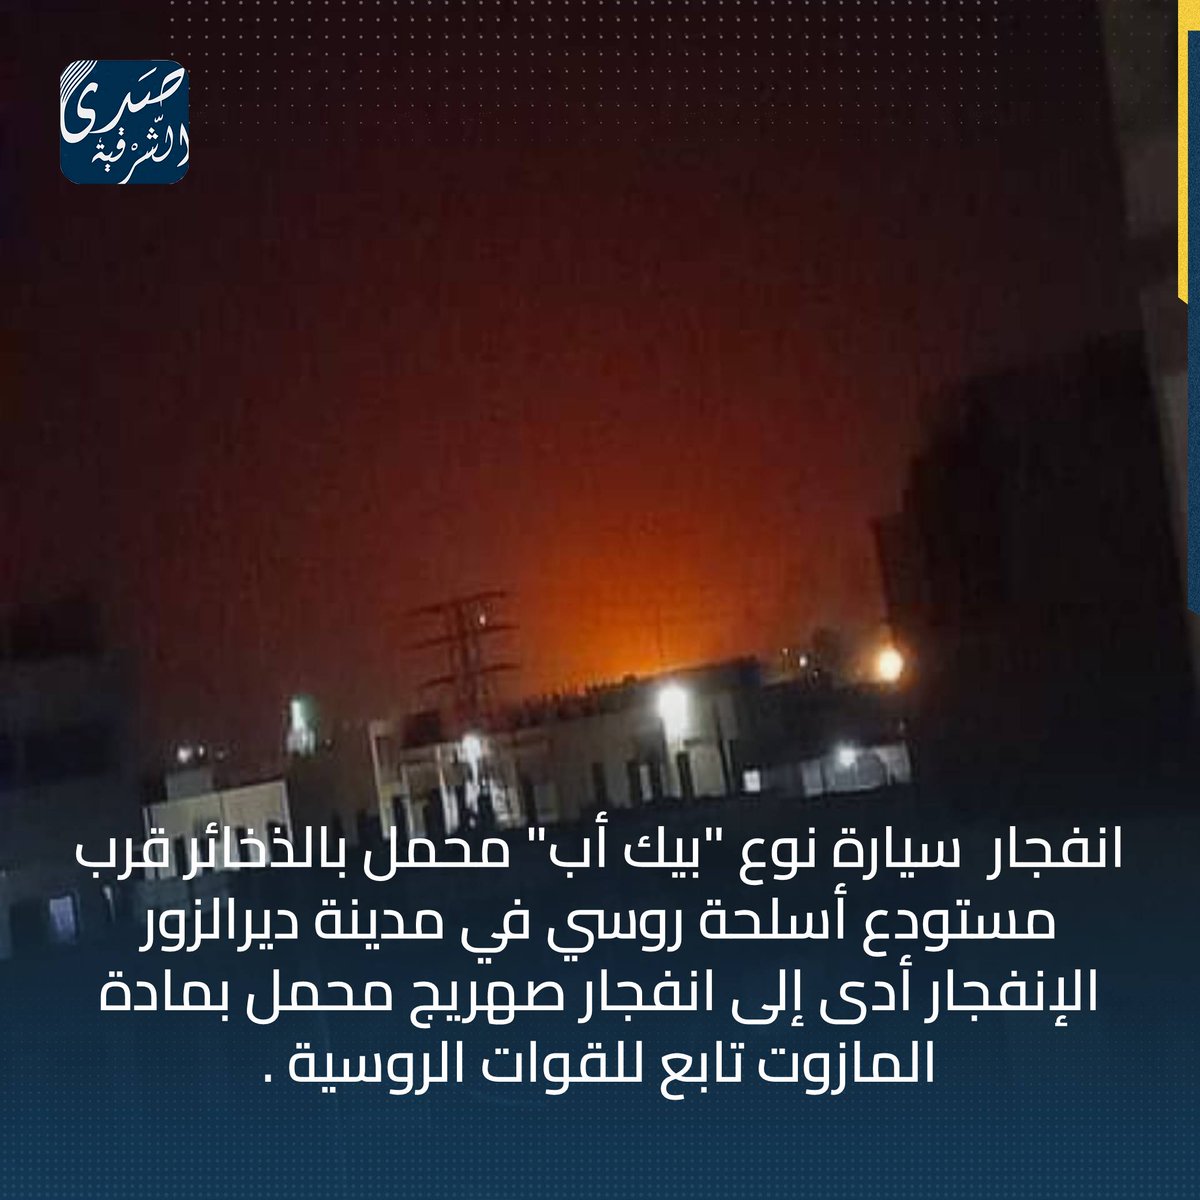 Explosions that were heard in Deir Ezzor were caused by the explosion of ammunition that was loaded with a pickup truck equipped with anti-aircraft ground near a Russian weapons depot, which led to the explosion of a diesel tank. Members of the security branches of the Assad government rushed to the place, accompanied by ambulances